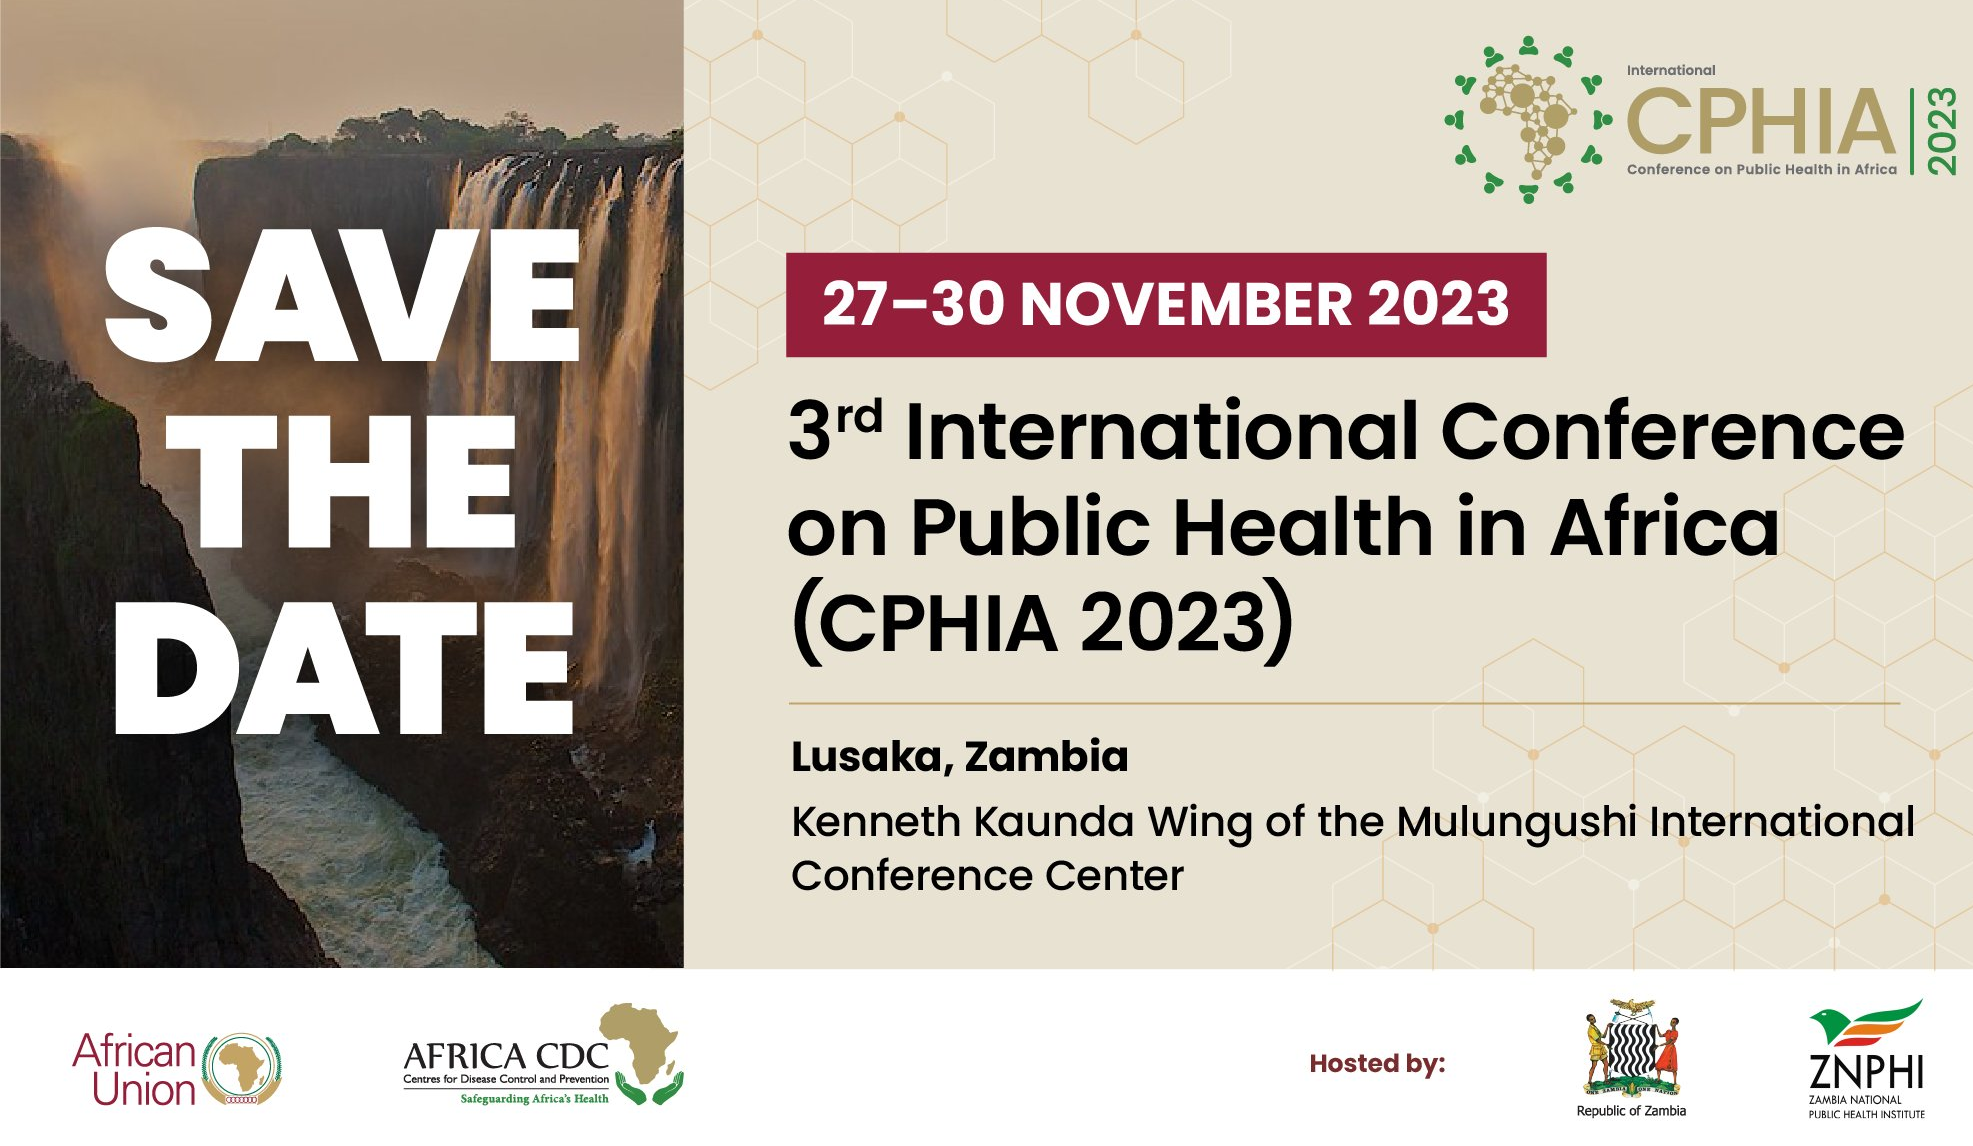 3rd International Conference on Public Health in Africa